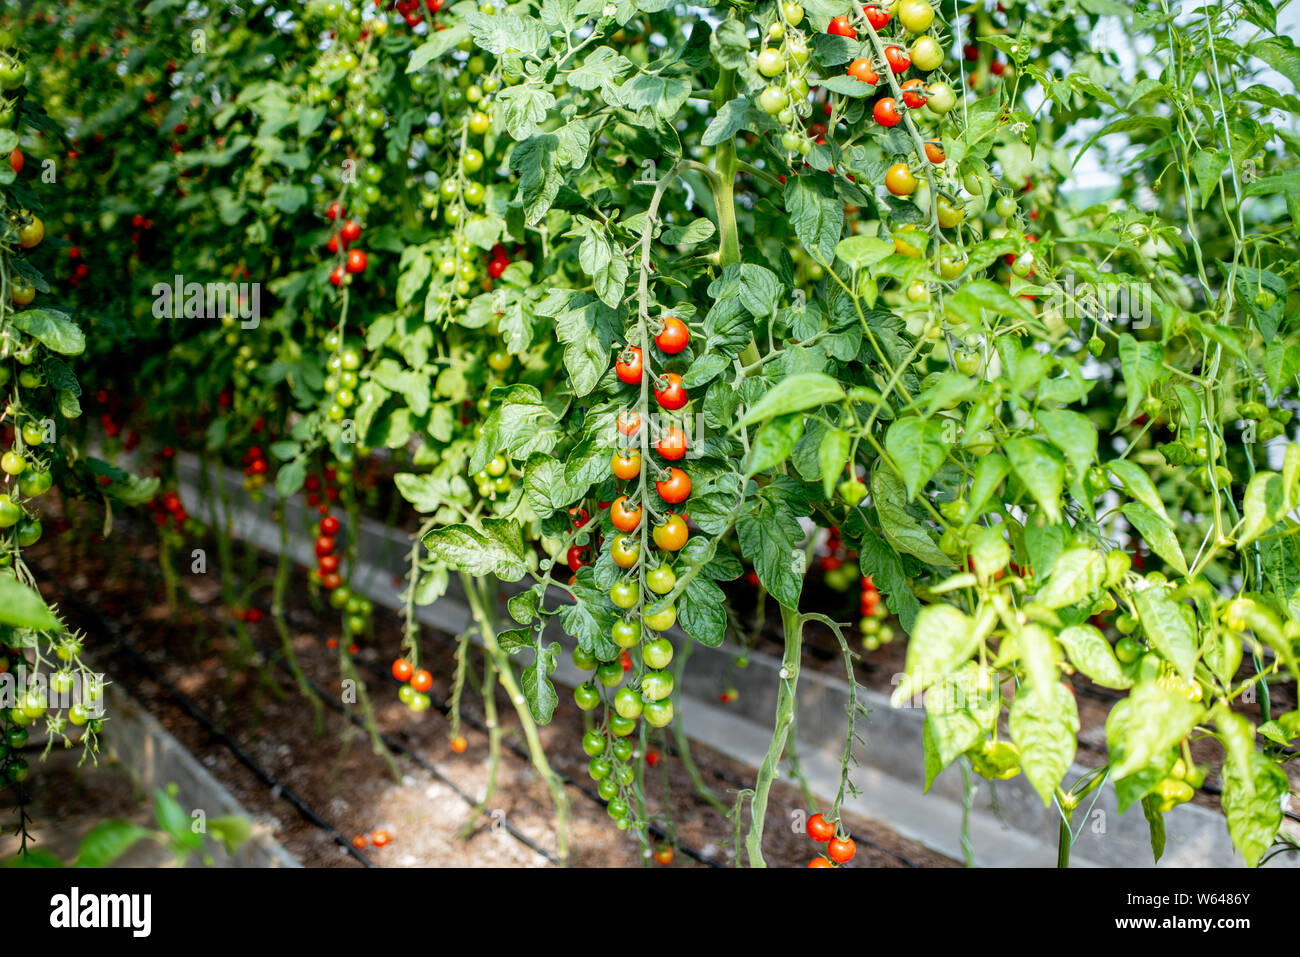 Branches with growing cherry tomatoes on the organic plantation, close-up view Stock Photo